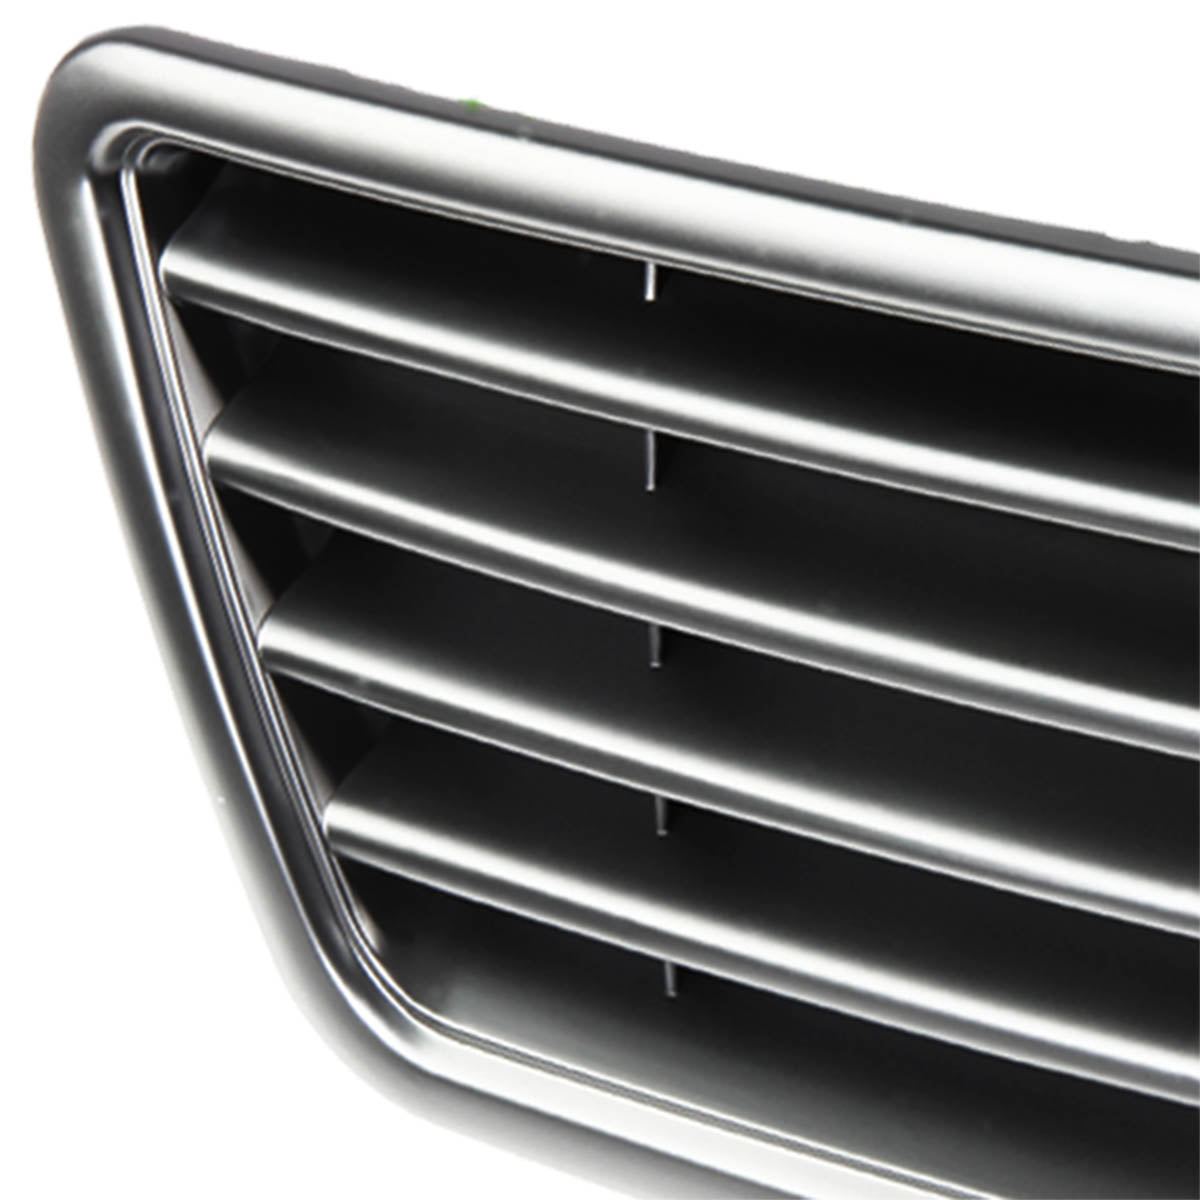 98-01 Audi A6 Quattro Front Grille - Badgeless Horizontal Fence Mesh - Black